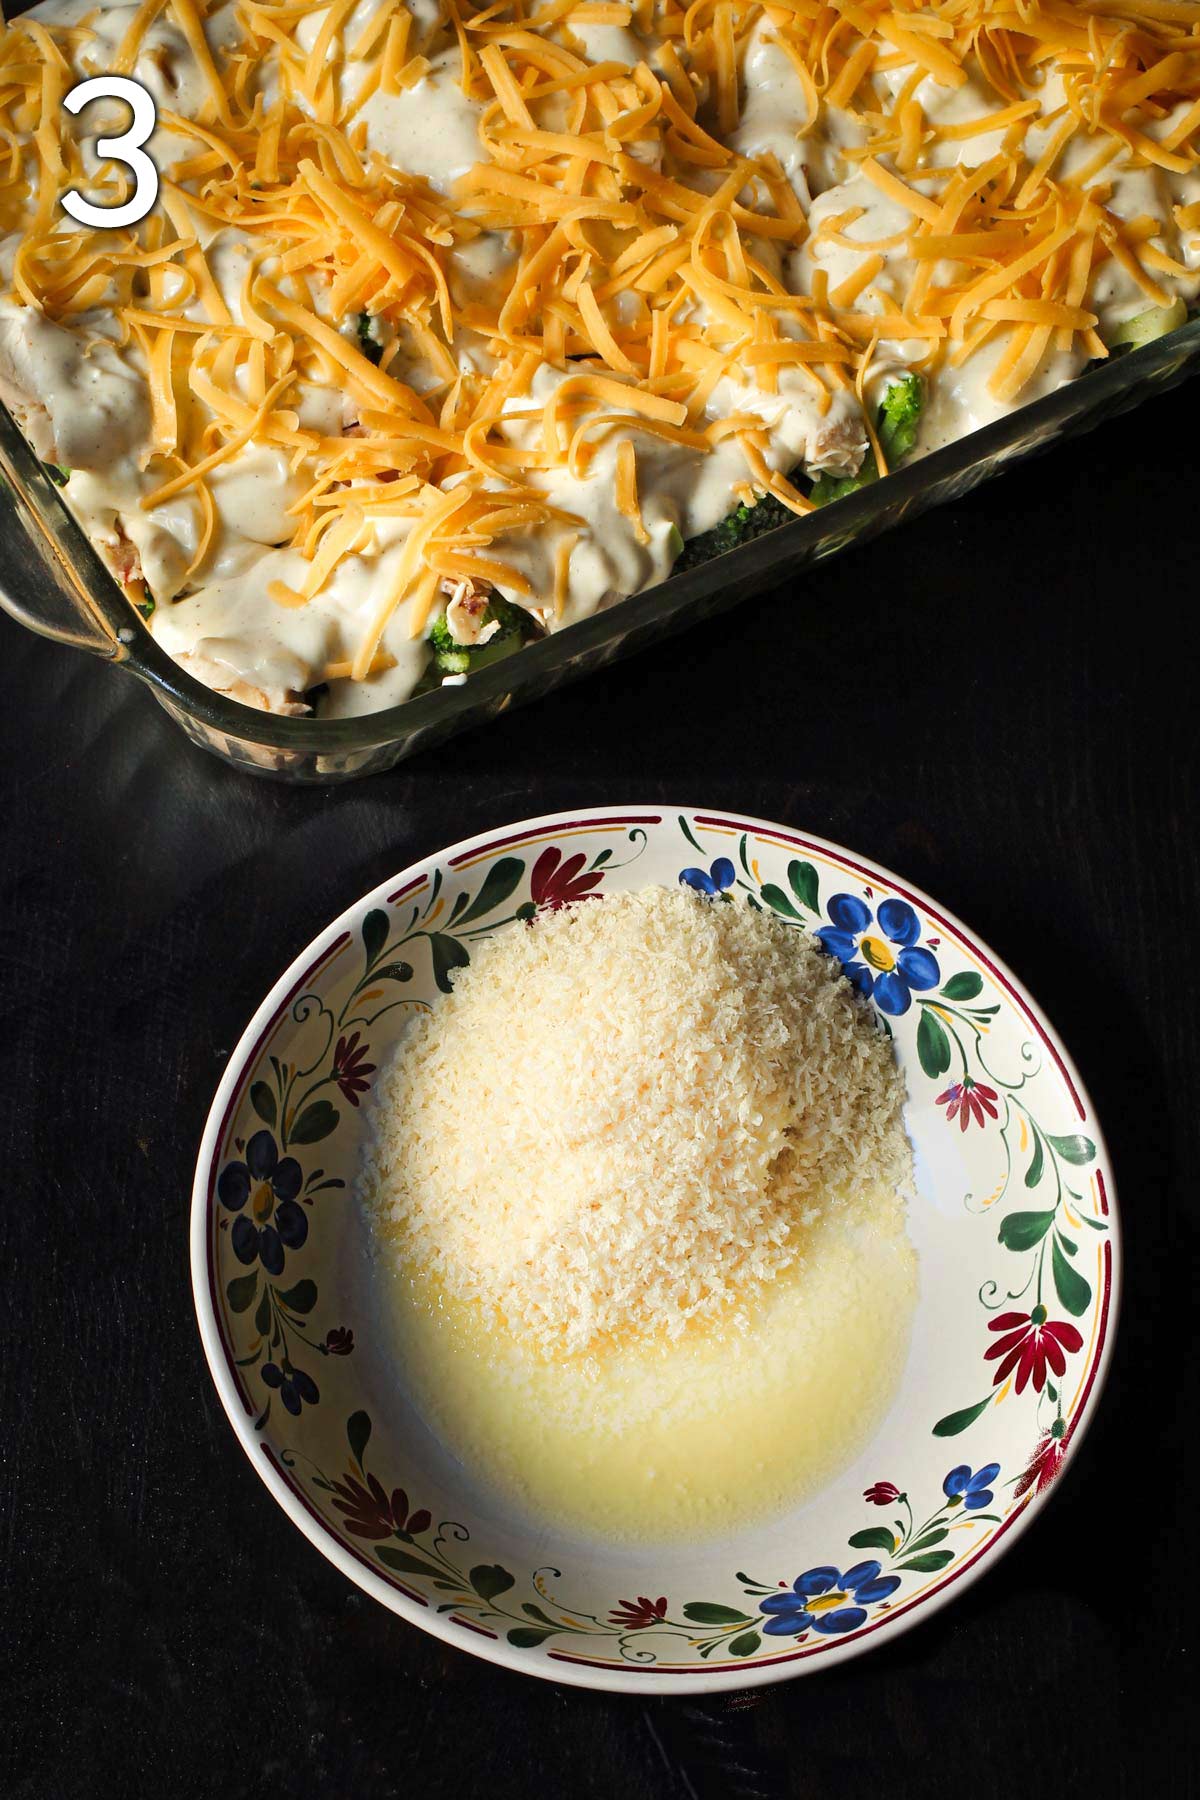 mixing butter and crumbs in small dish next to casserole with cheese on it.